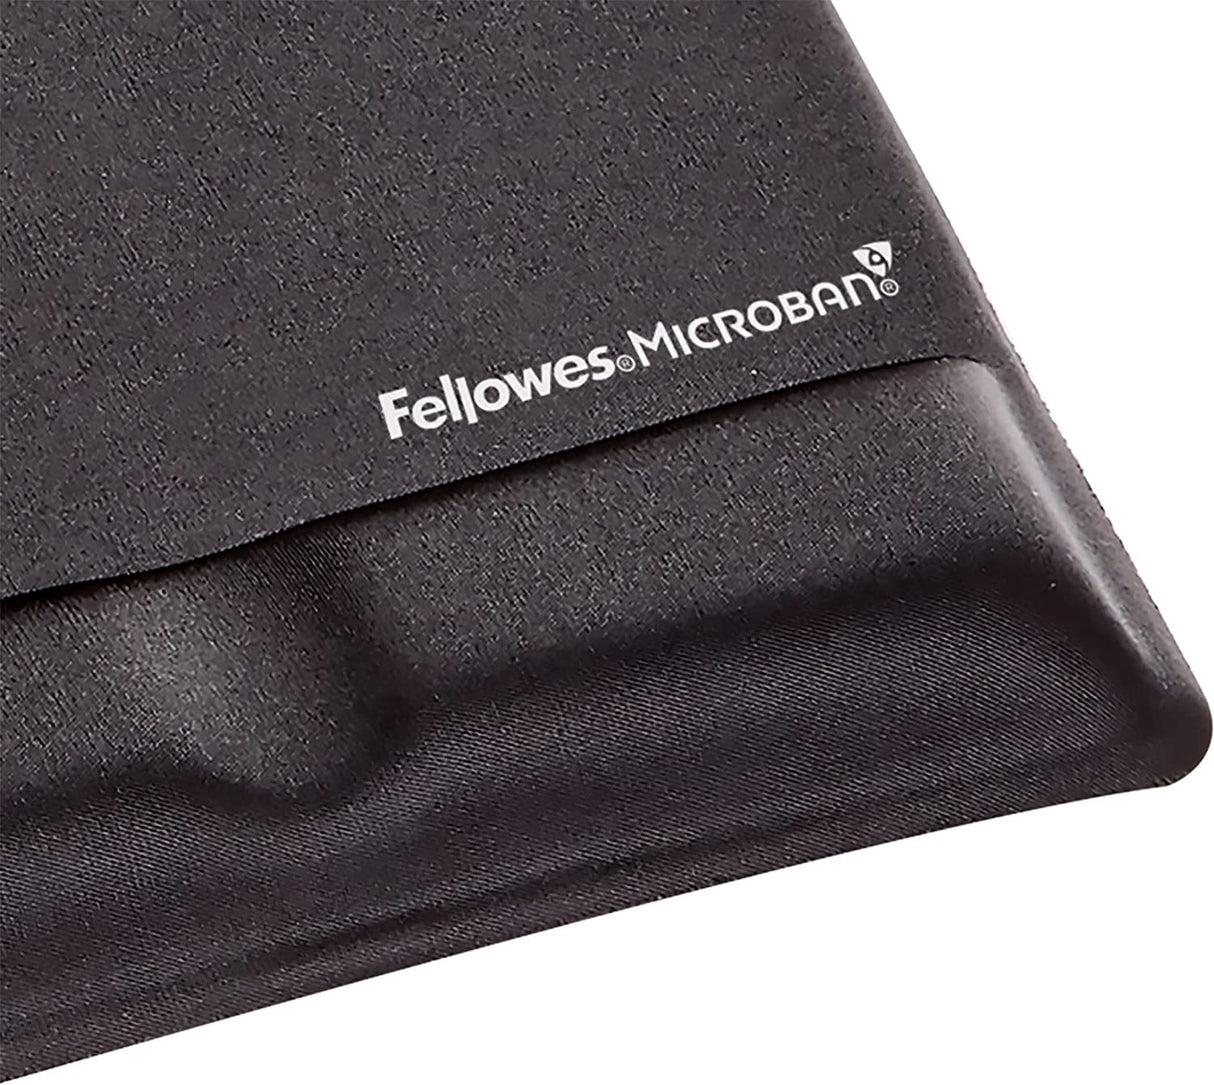 Fellowes Mouse Pad/Wrist Support with Mircoban Protection, Black (9181201) Black Single